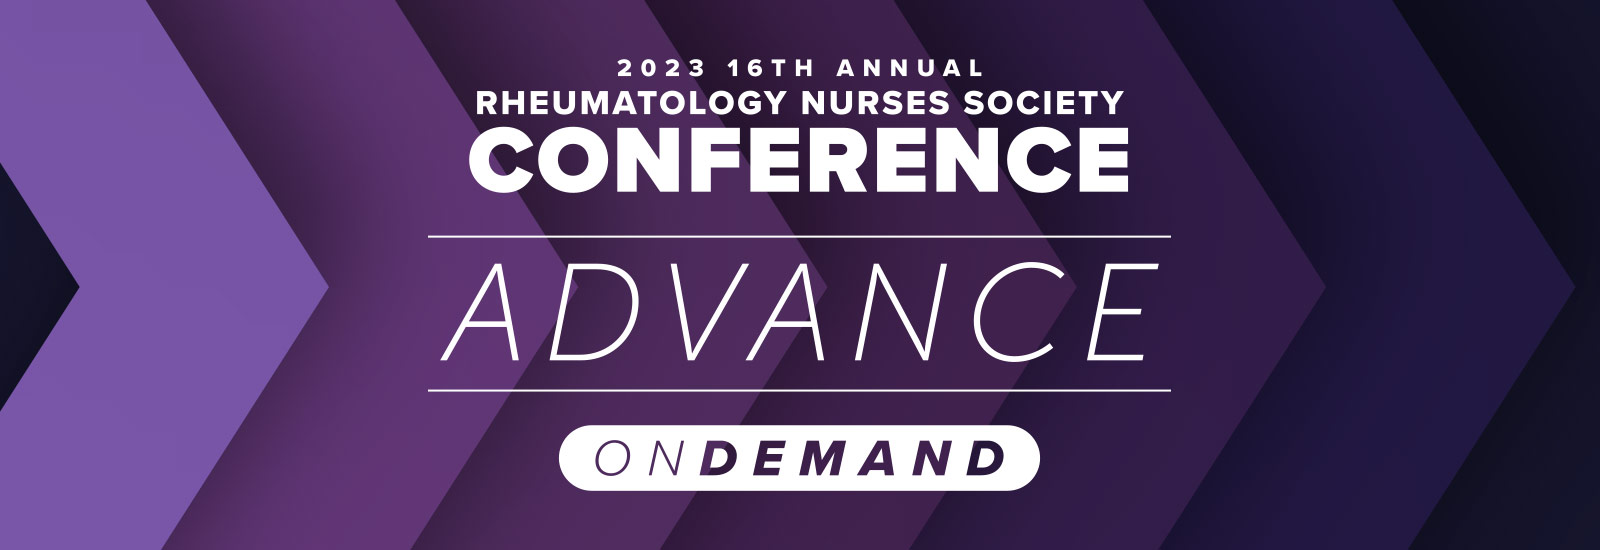 2023 RNS Conference OnDemand